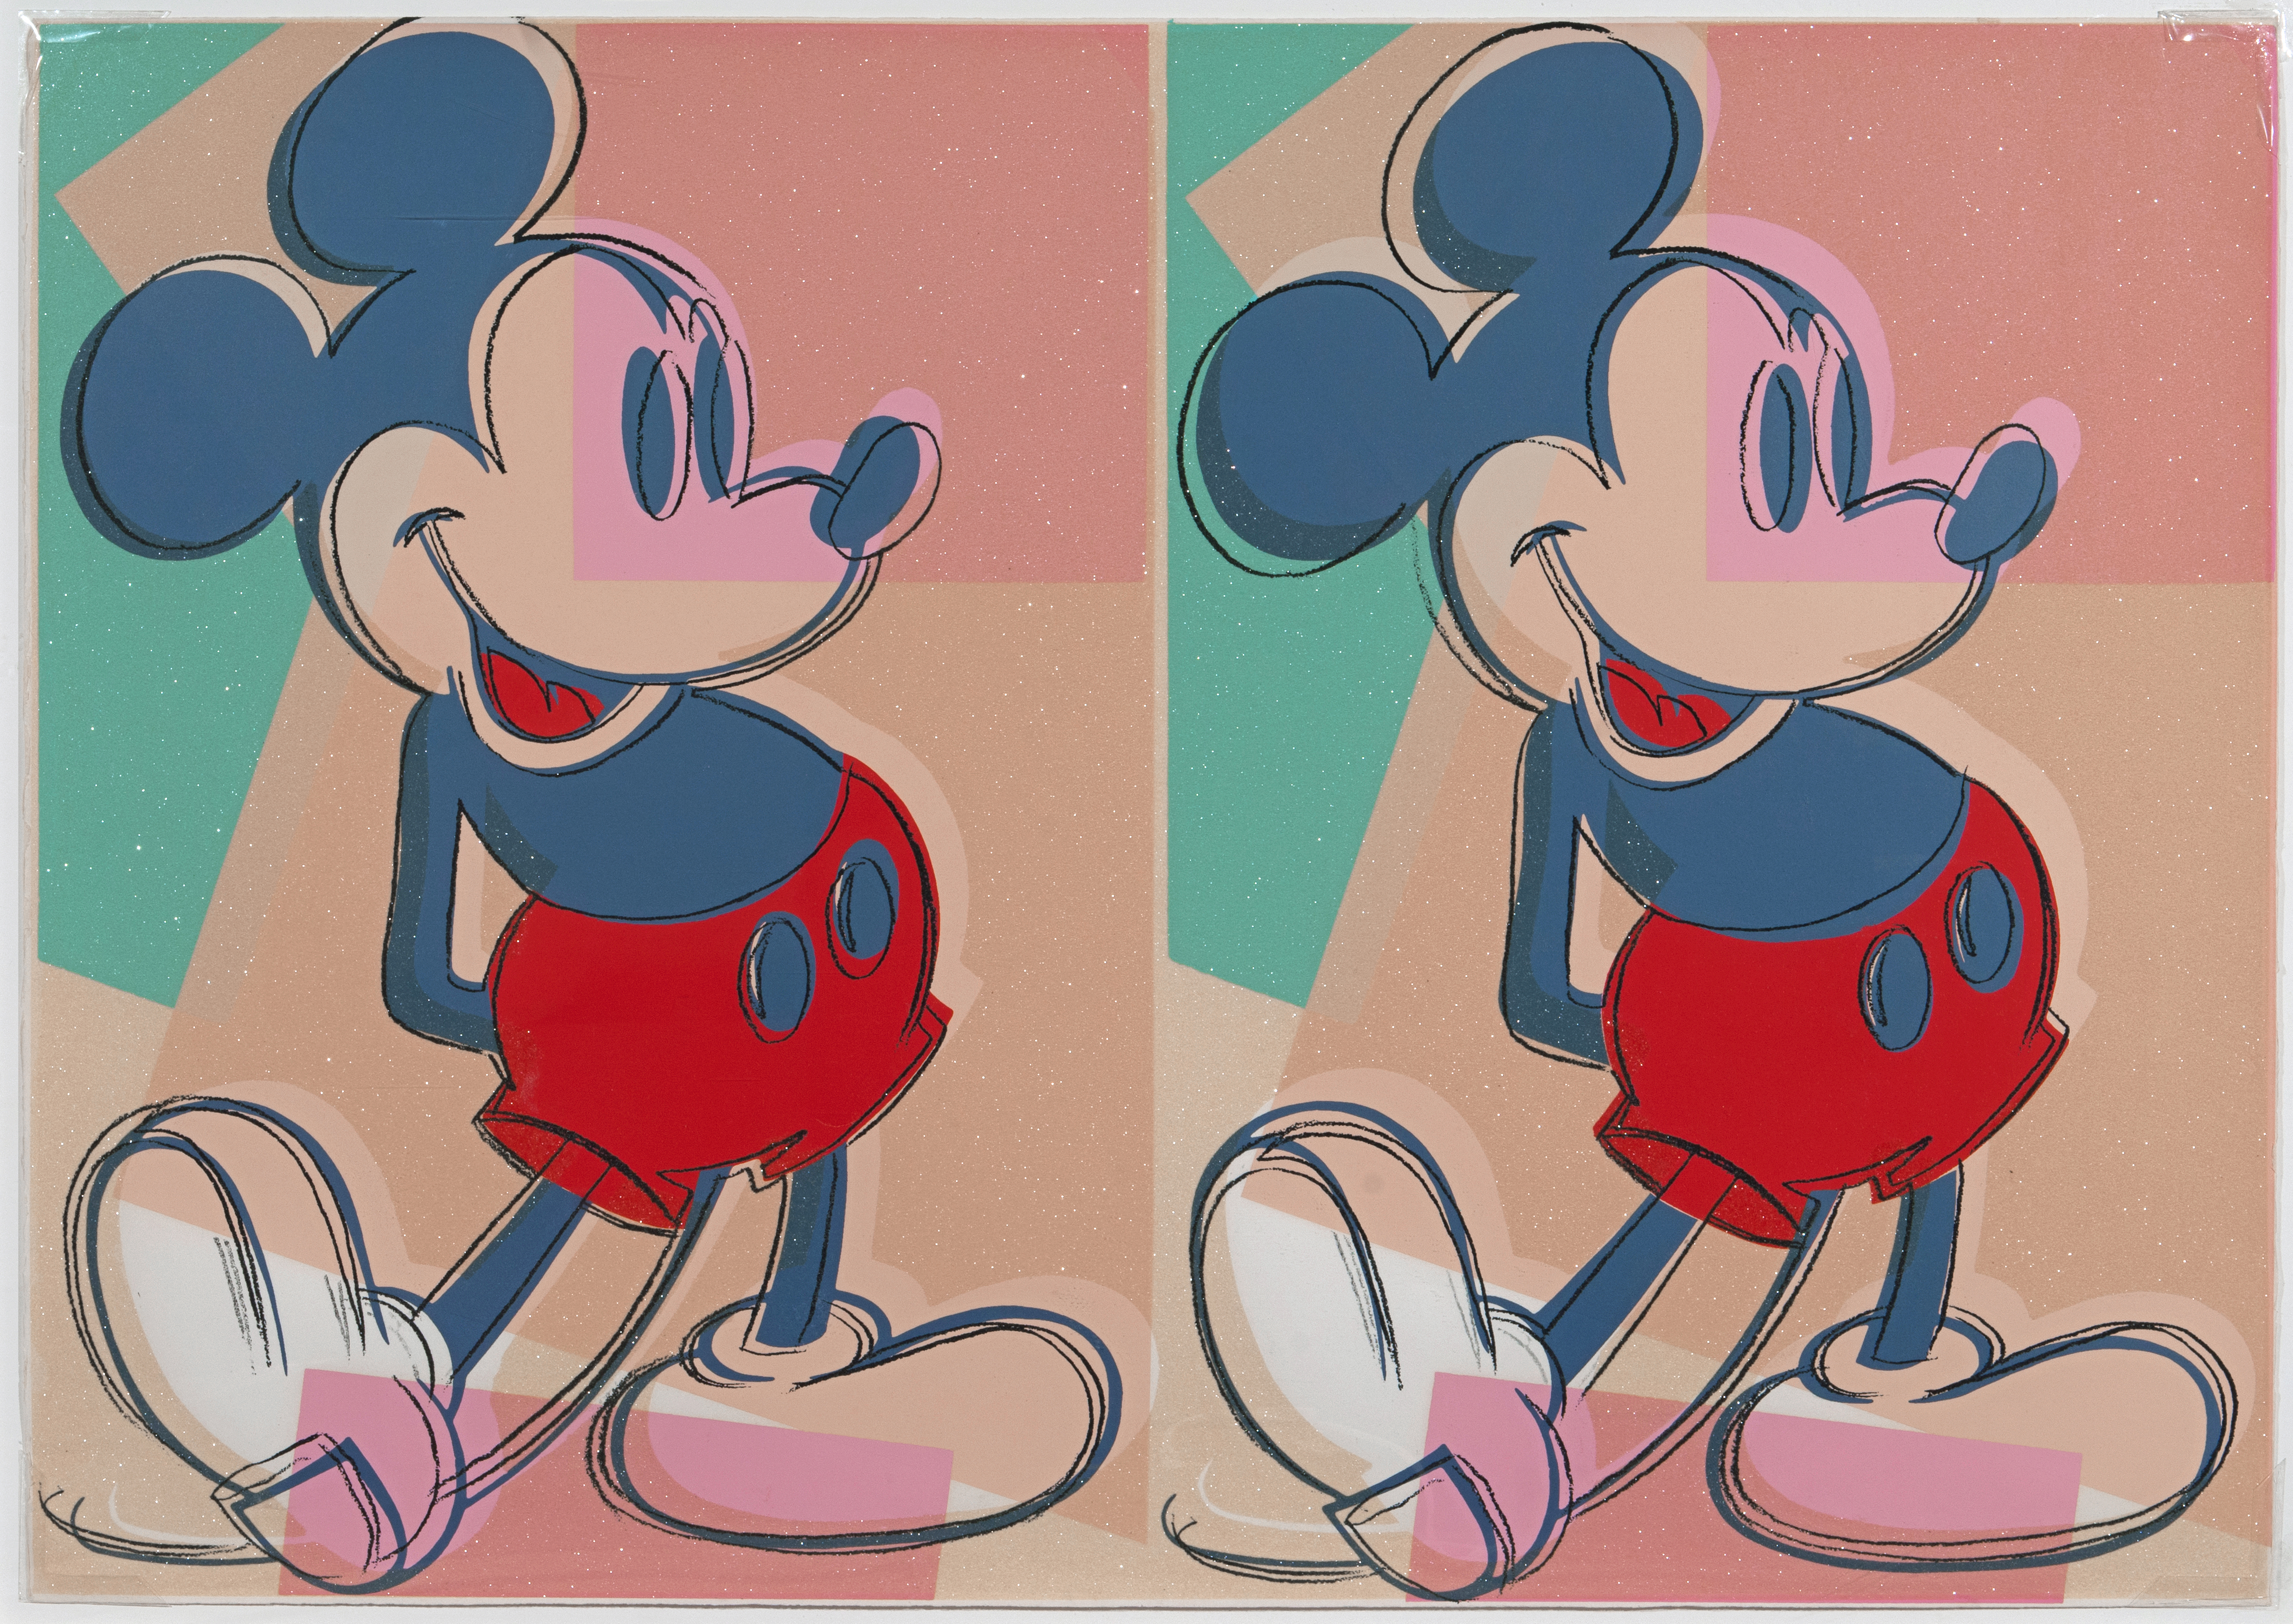 Two duplicative photos of Mickey Mouse placed next to each other.